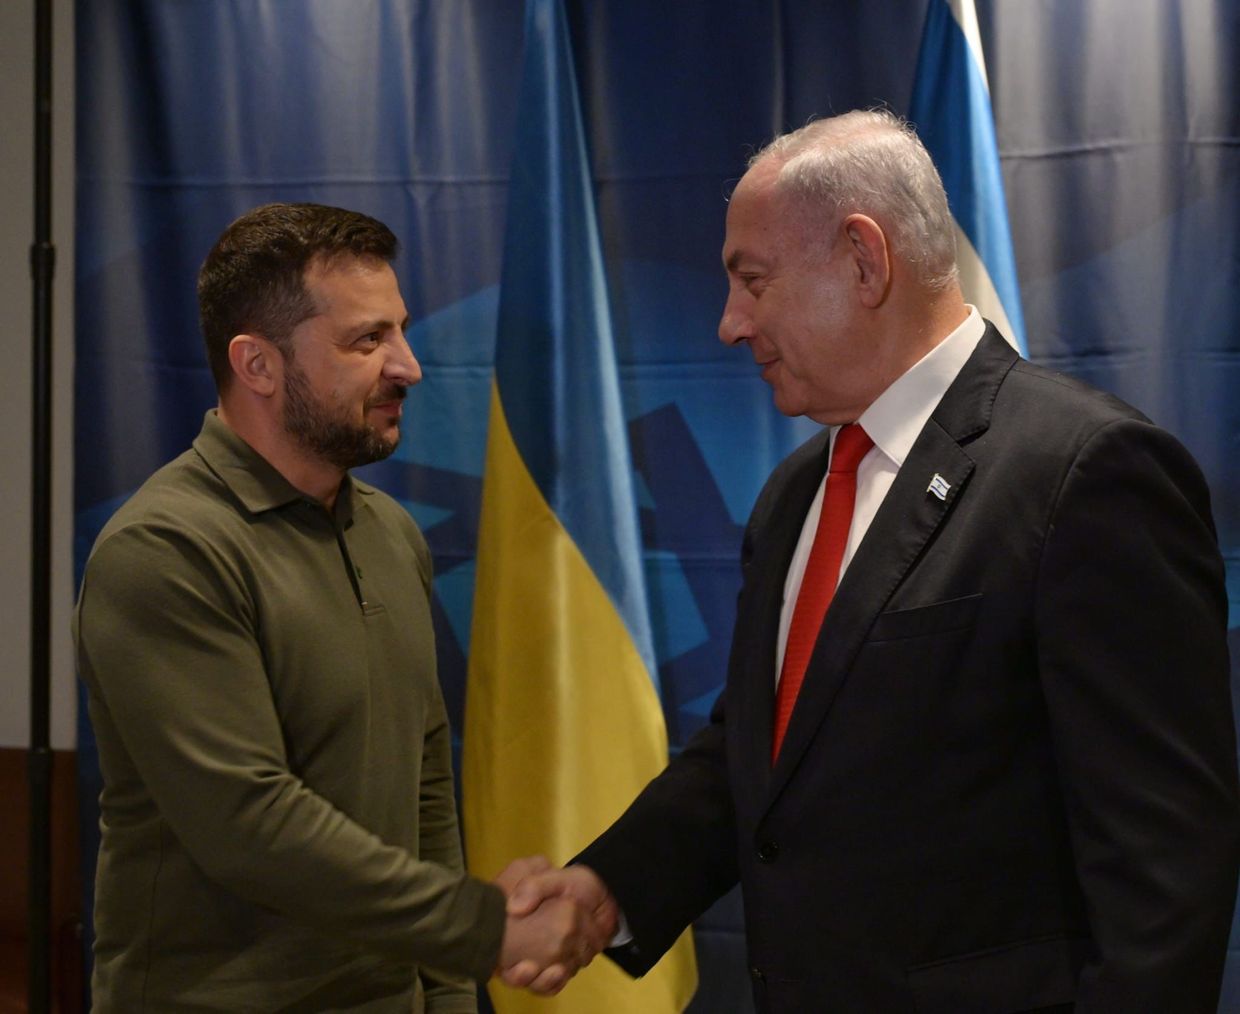 Zelensky, Netanyahu's meeting in New York highlights their differences